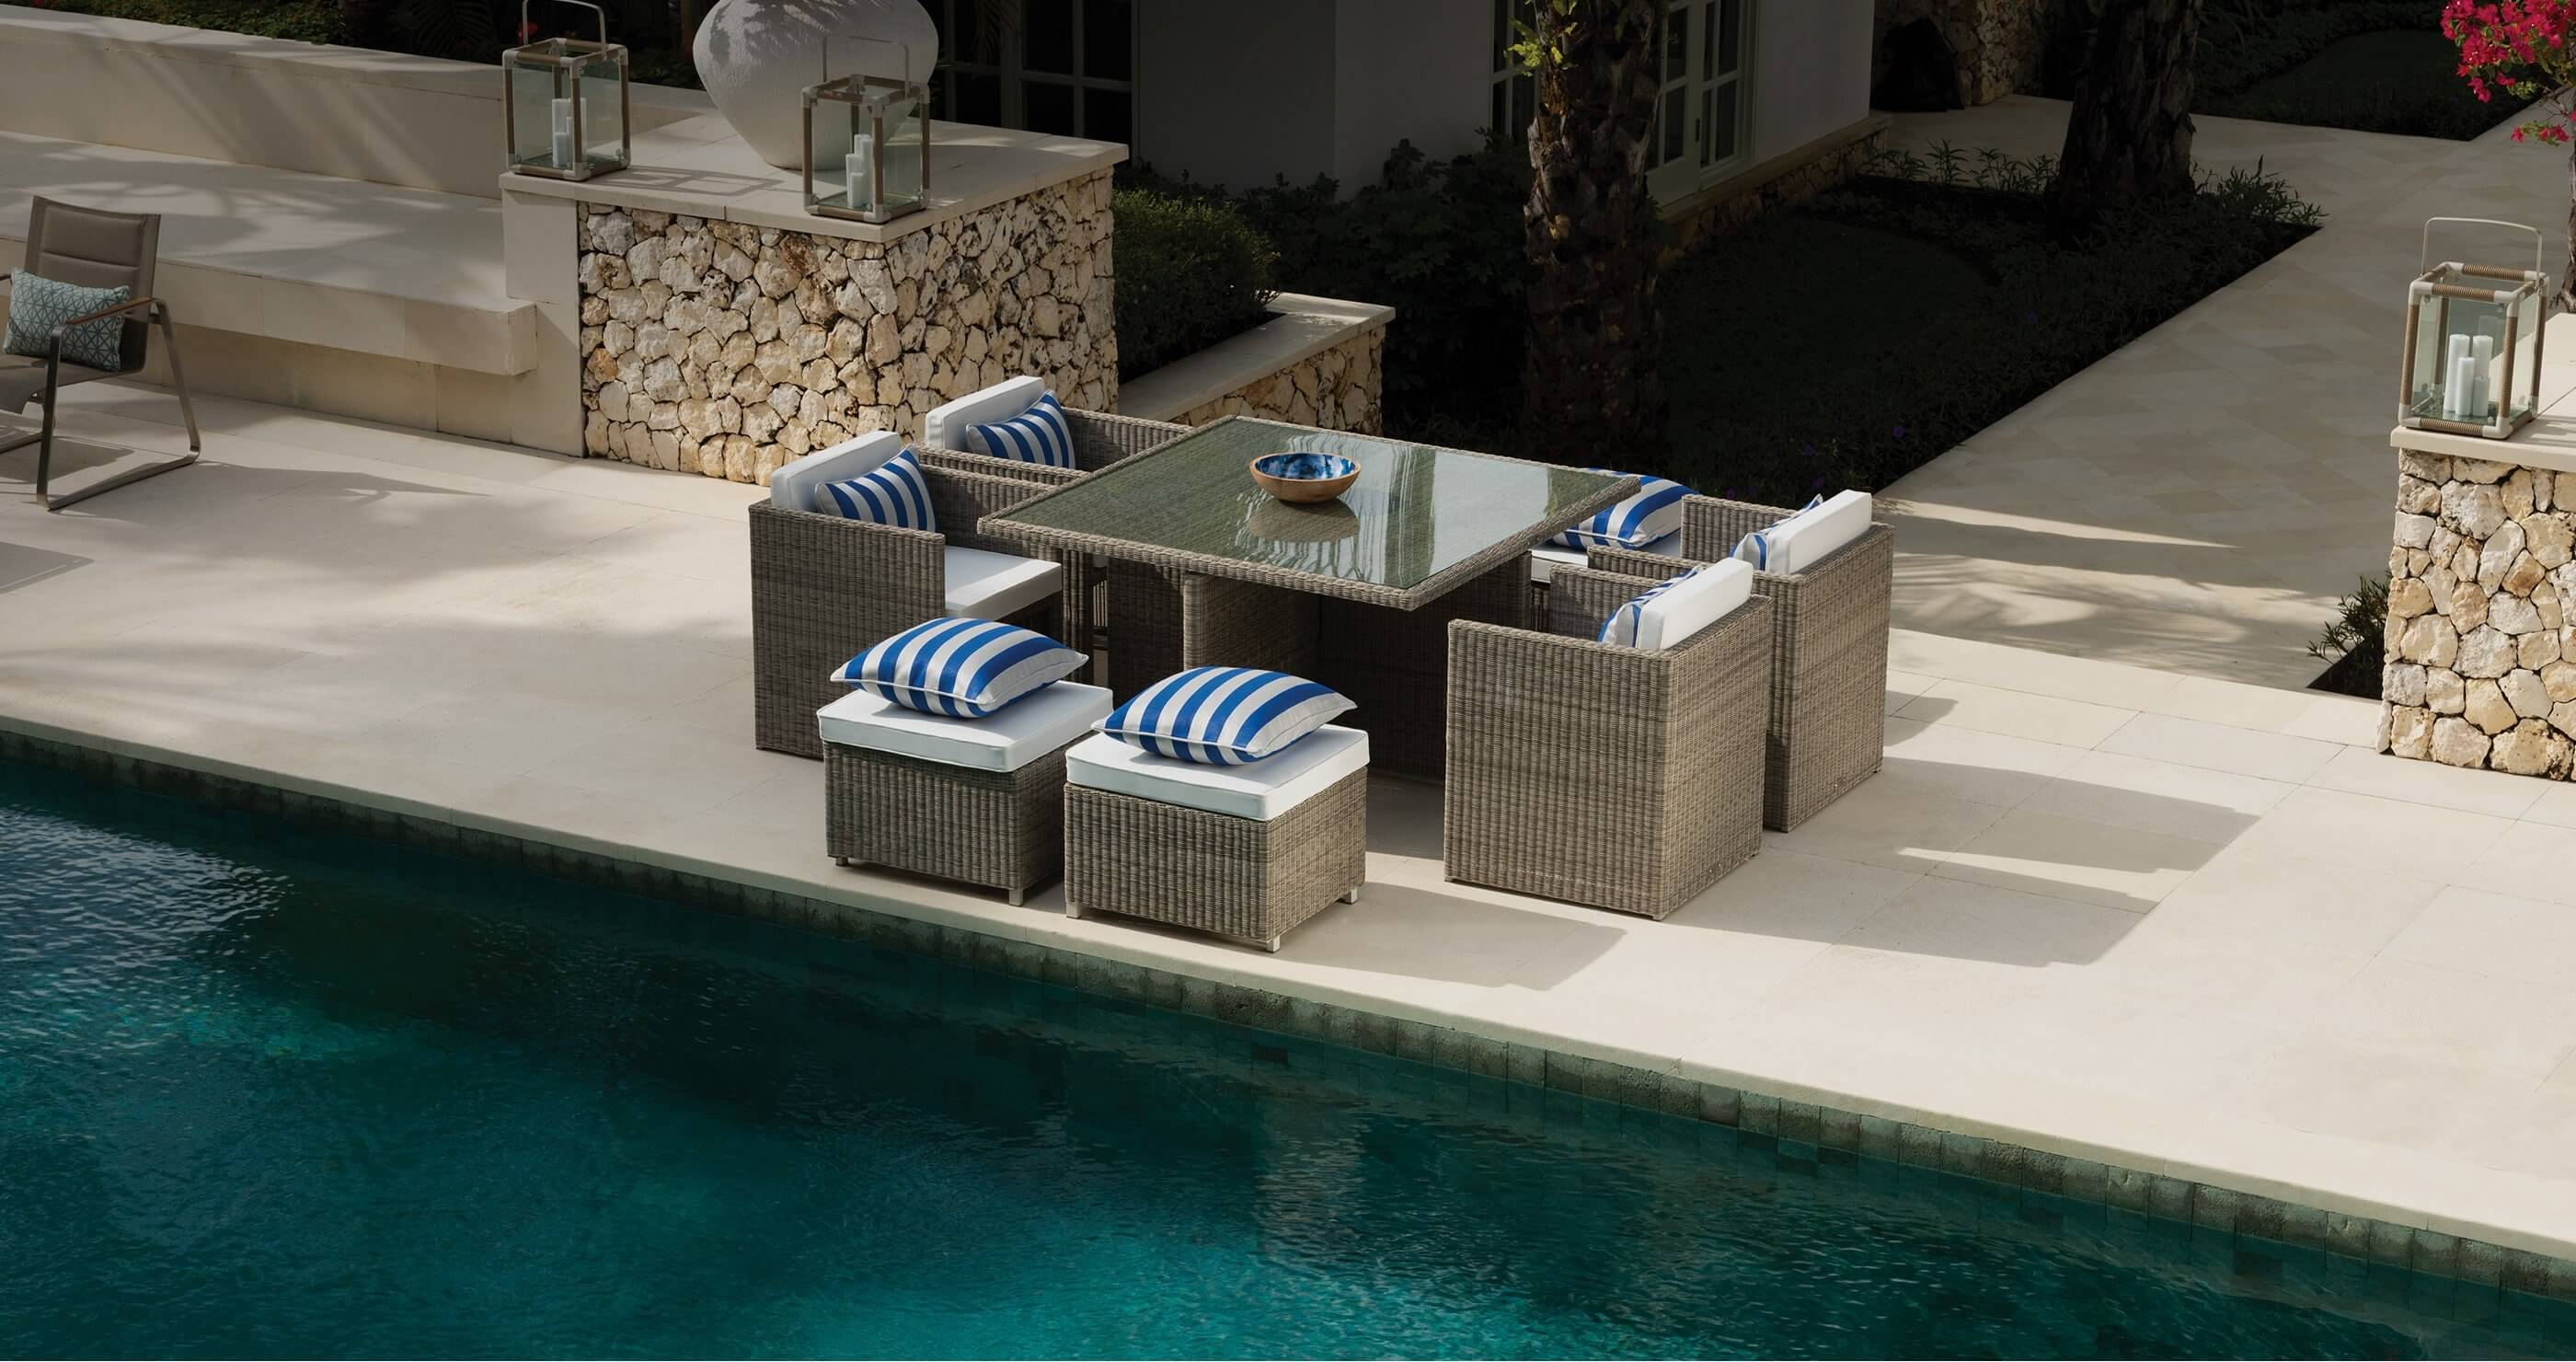 Indian Ocean furniture: luxury outdoor table and chair set